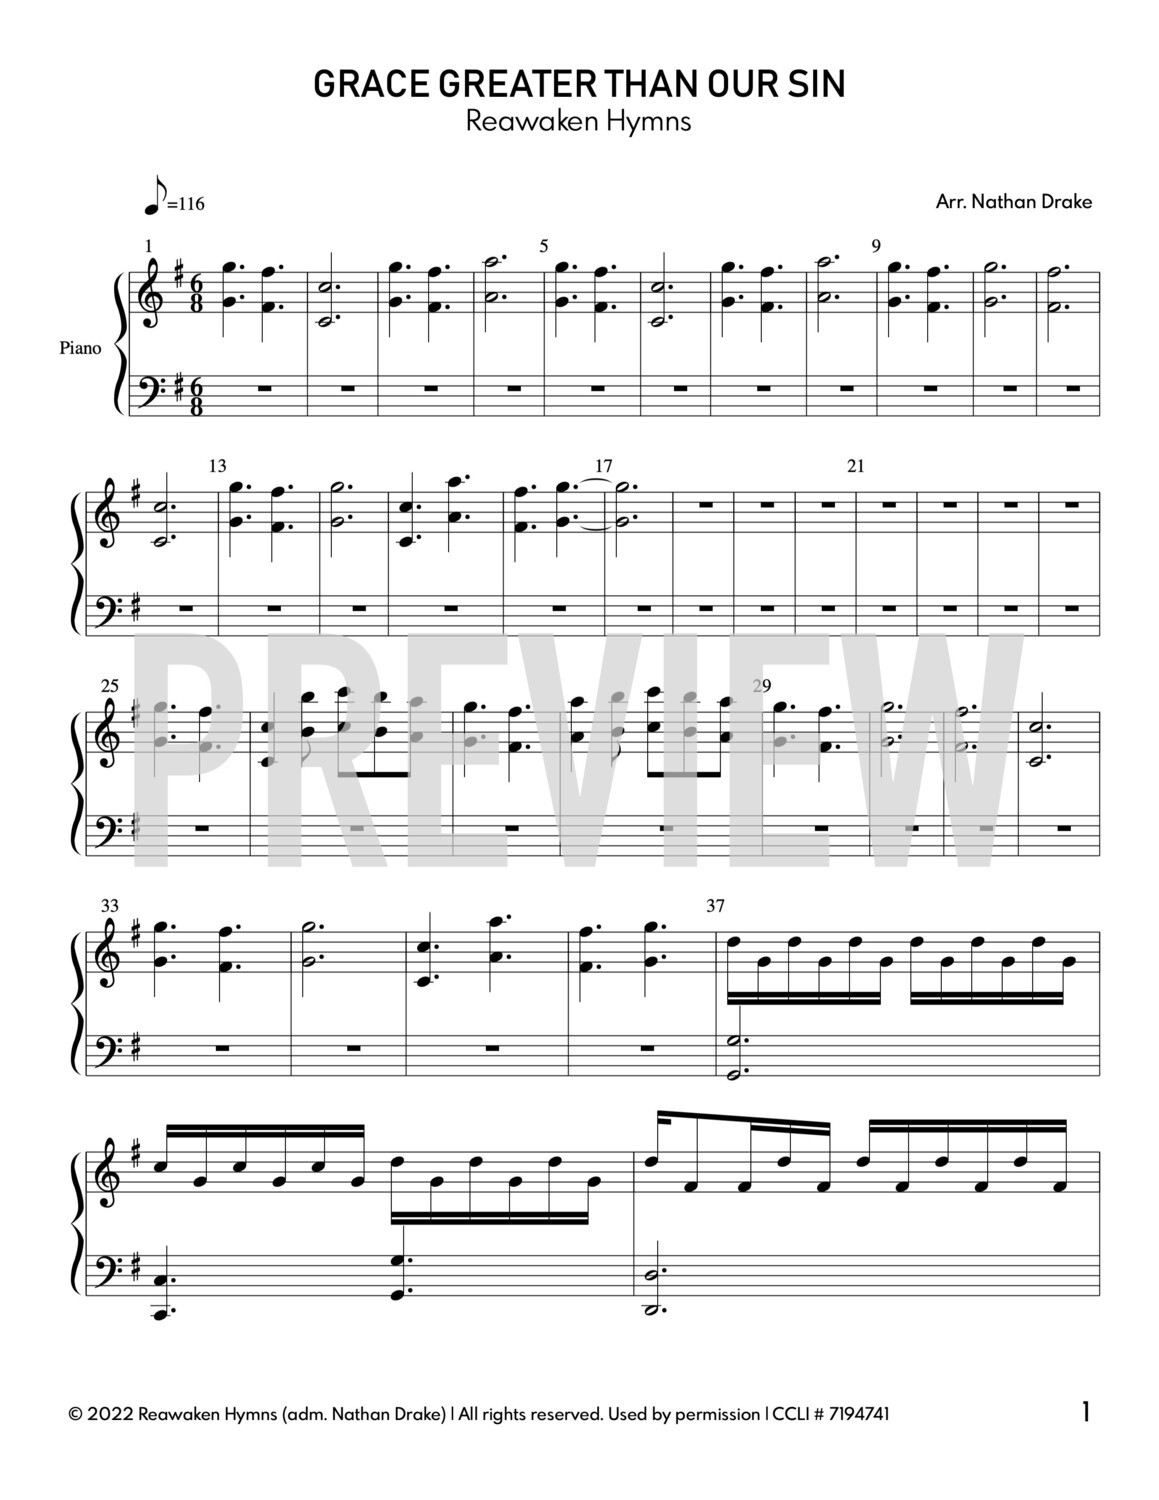 Grace Greater Than Our Sin - Piano Sheet Music